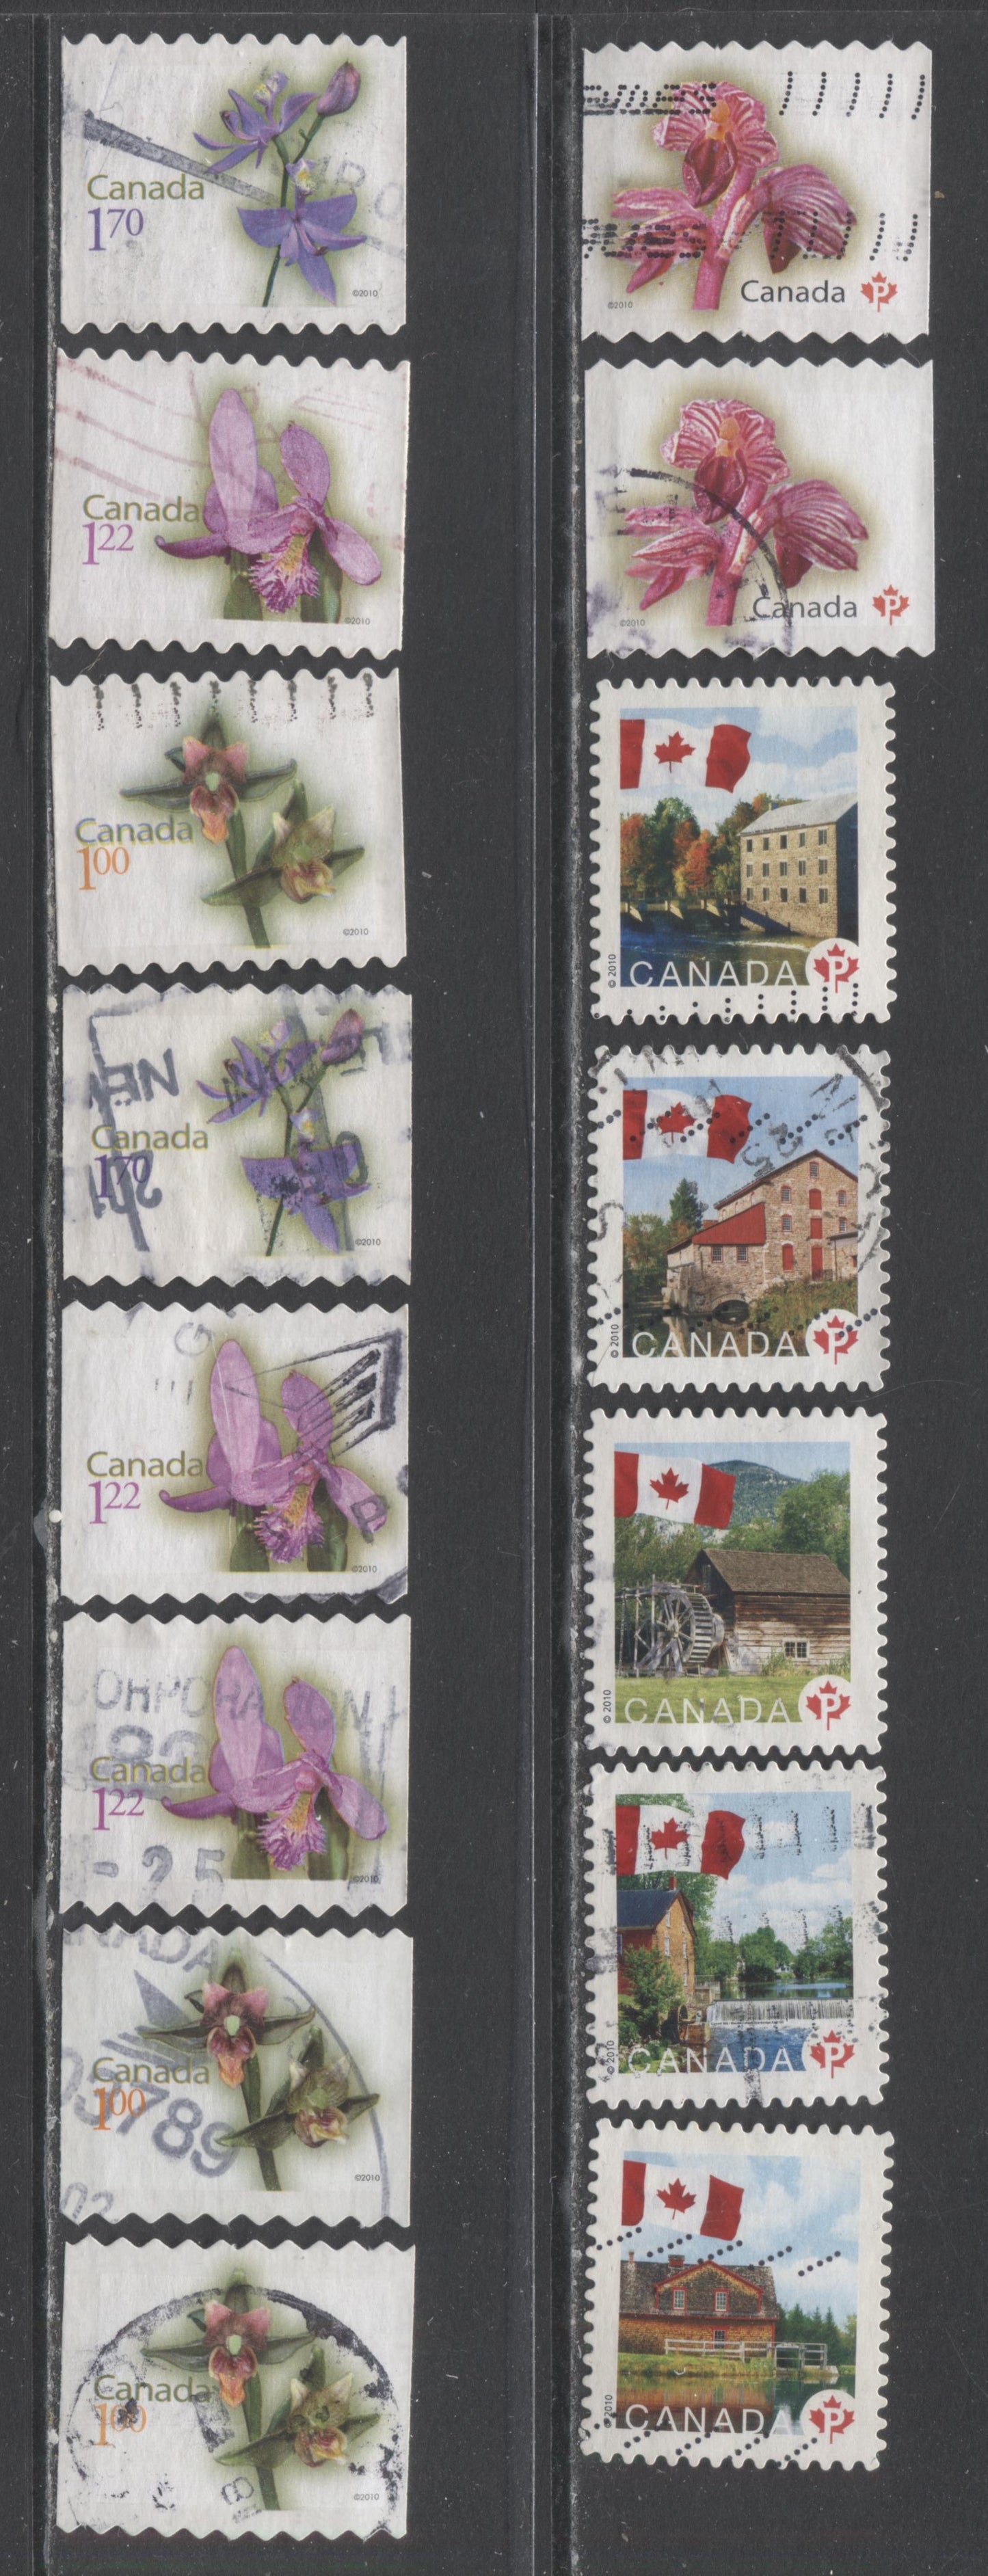 Lot 114 Canada #2351/2364 P(57c)-$1.70 Multicolored Flags & Flowers, 2010 Flag & Flower Definitives, 15 fine/very fine used singles Includes Most Compound Die Cuts Except 2360iii